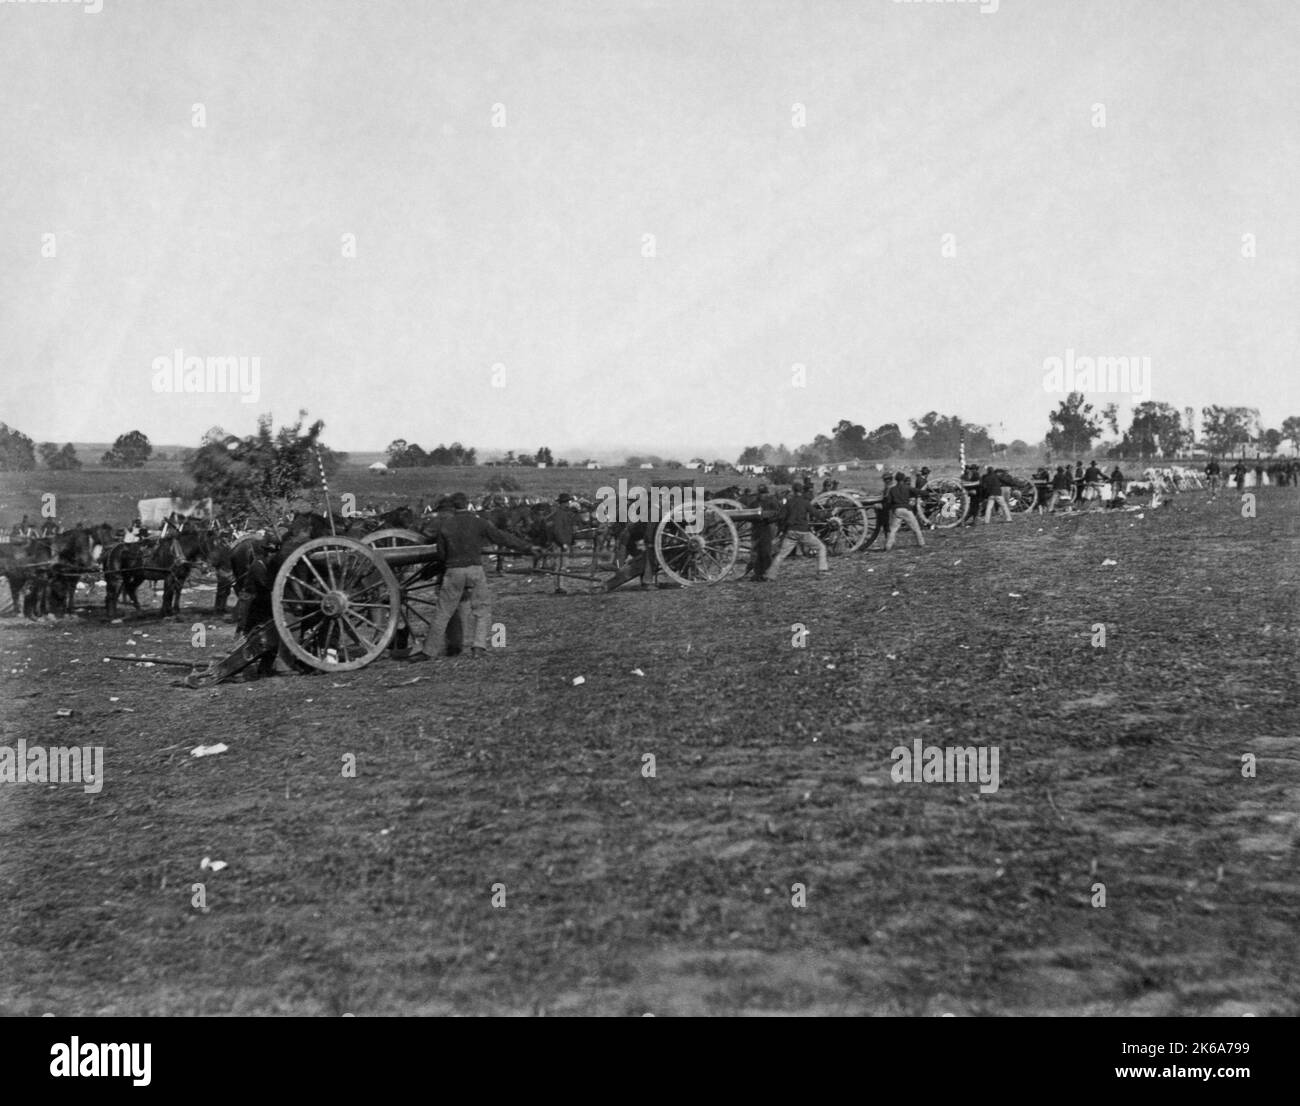 Union artillery lined up in a row of cannons in a field, Fredericksburg, Virginia, 1862. Stock Photo